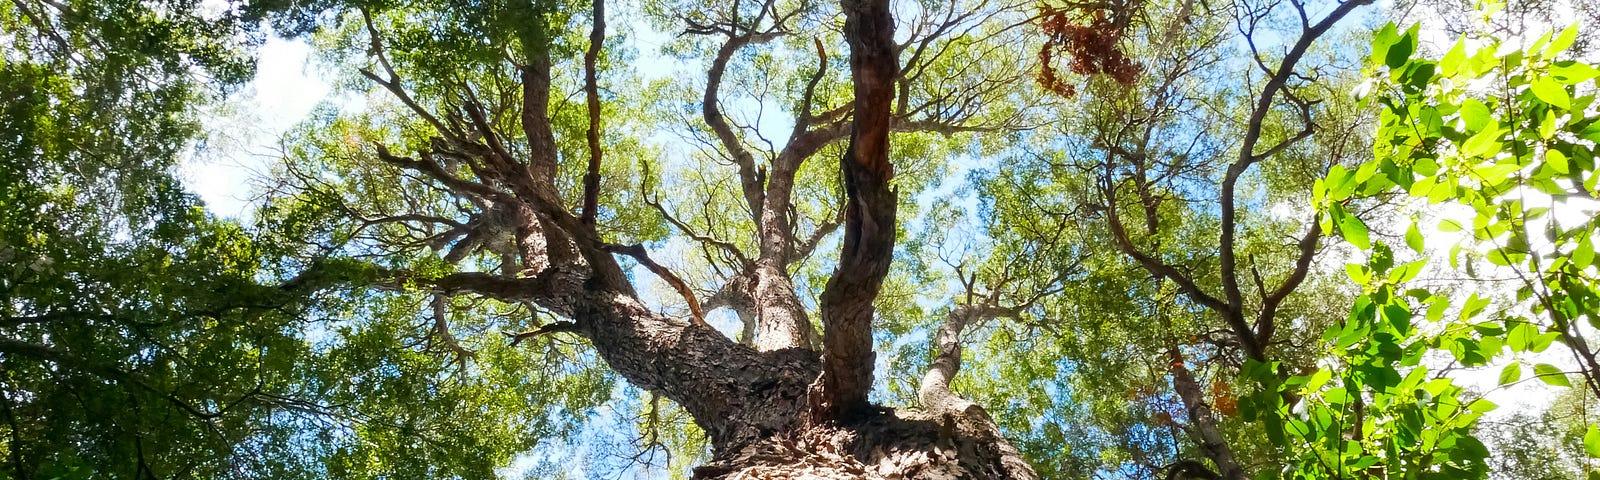 A view of a blue sky from the base of the wide trunk of a tree through the top branches with green leaves.